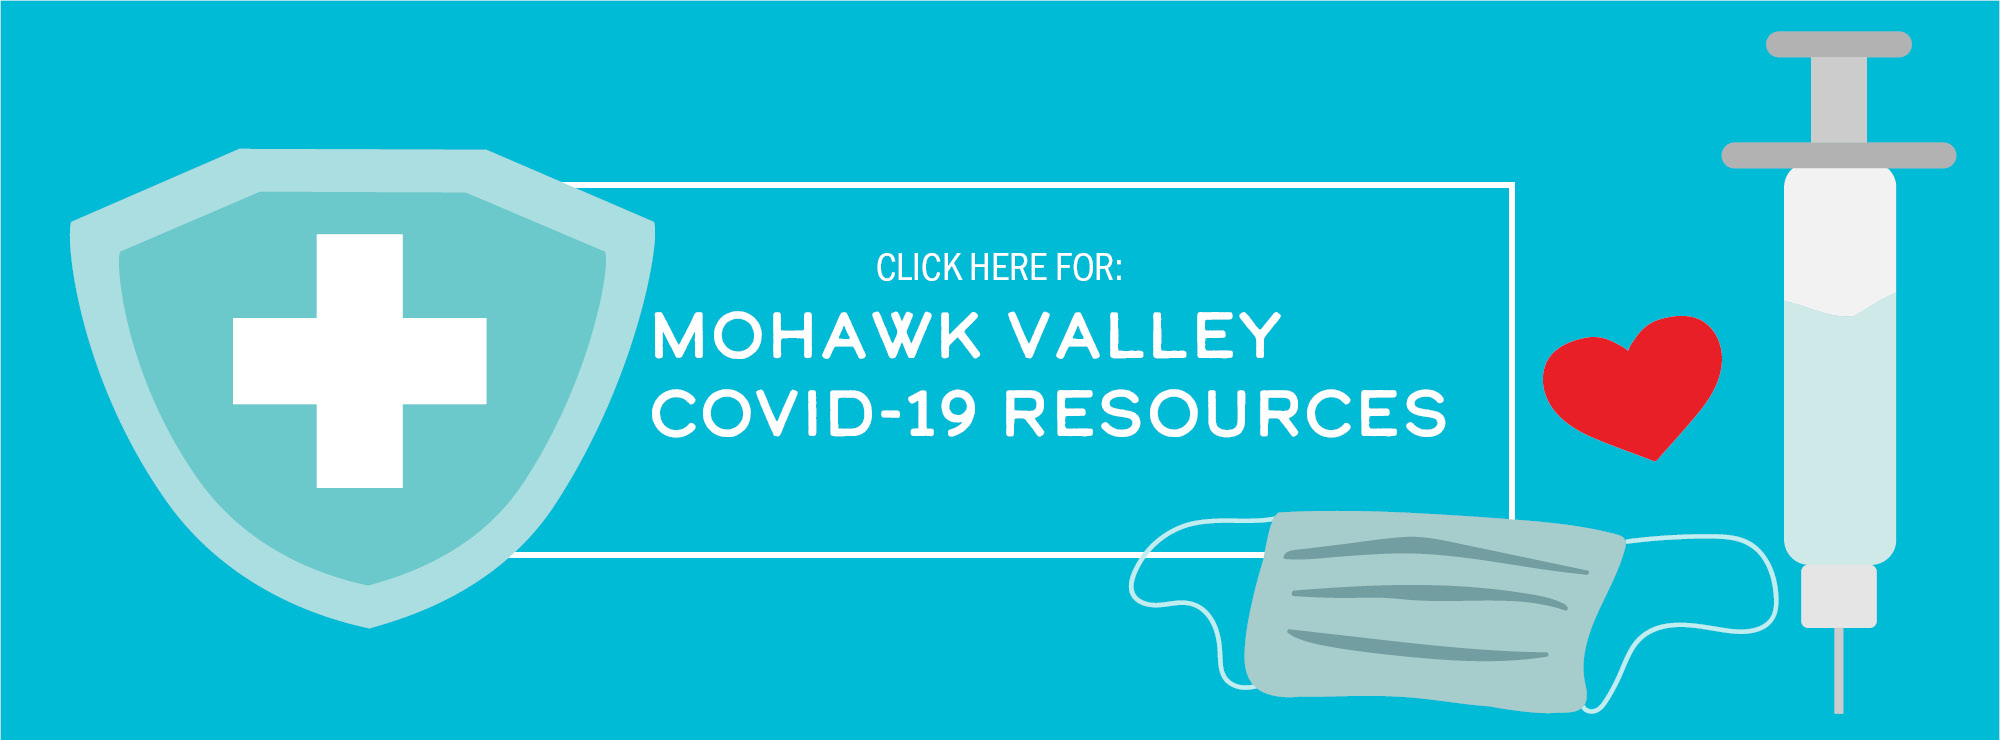 Mohawk Valley COVID-19 Resources